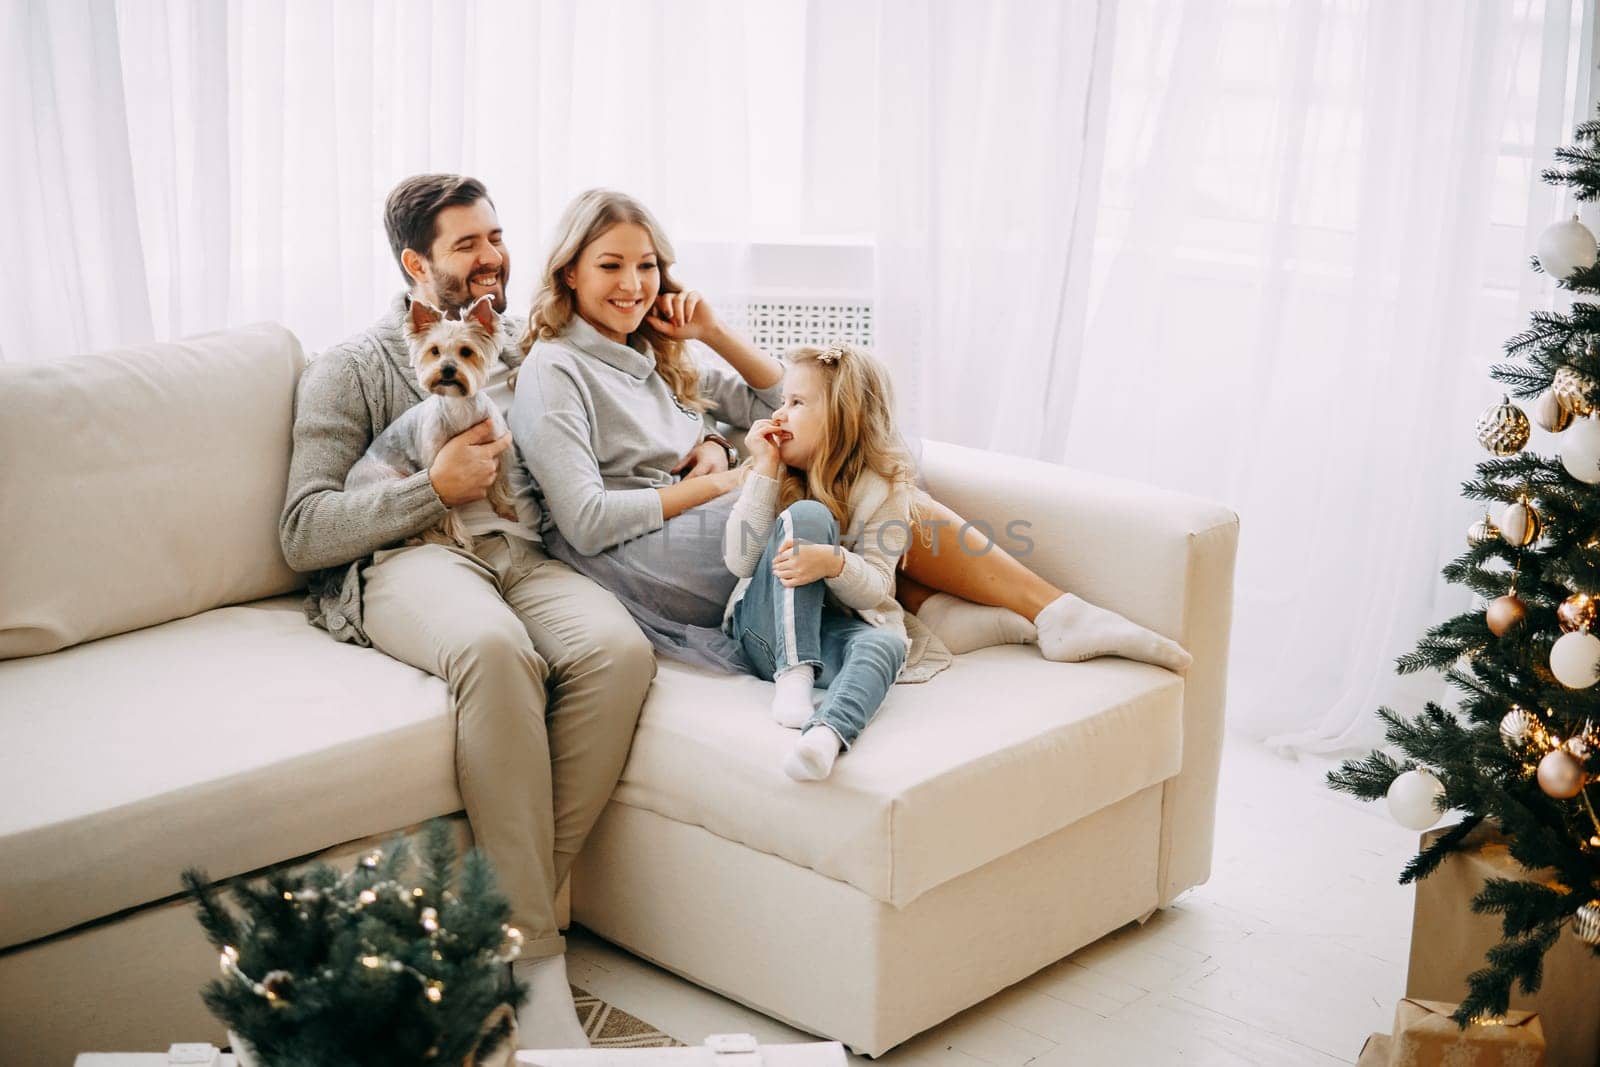 Happy family: mom, dad and daughter. Family in a bright New Year's interior with a Christmas tree. by Annu1tochka